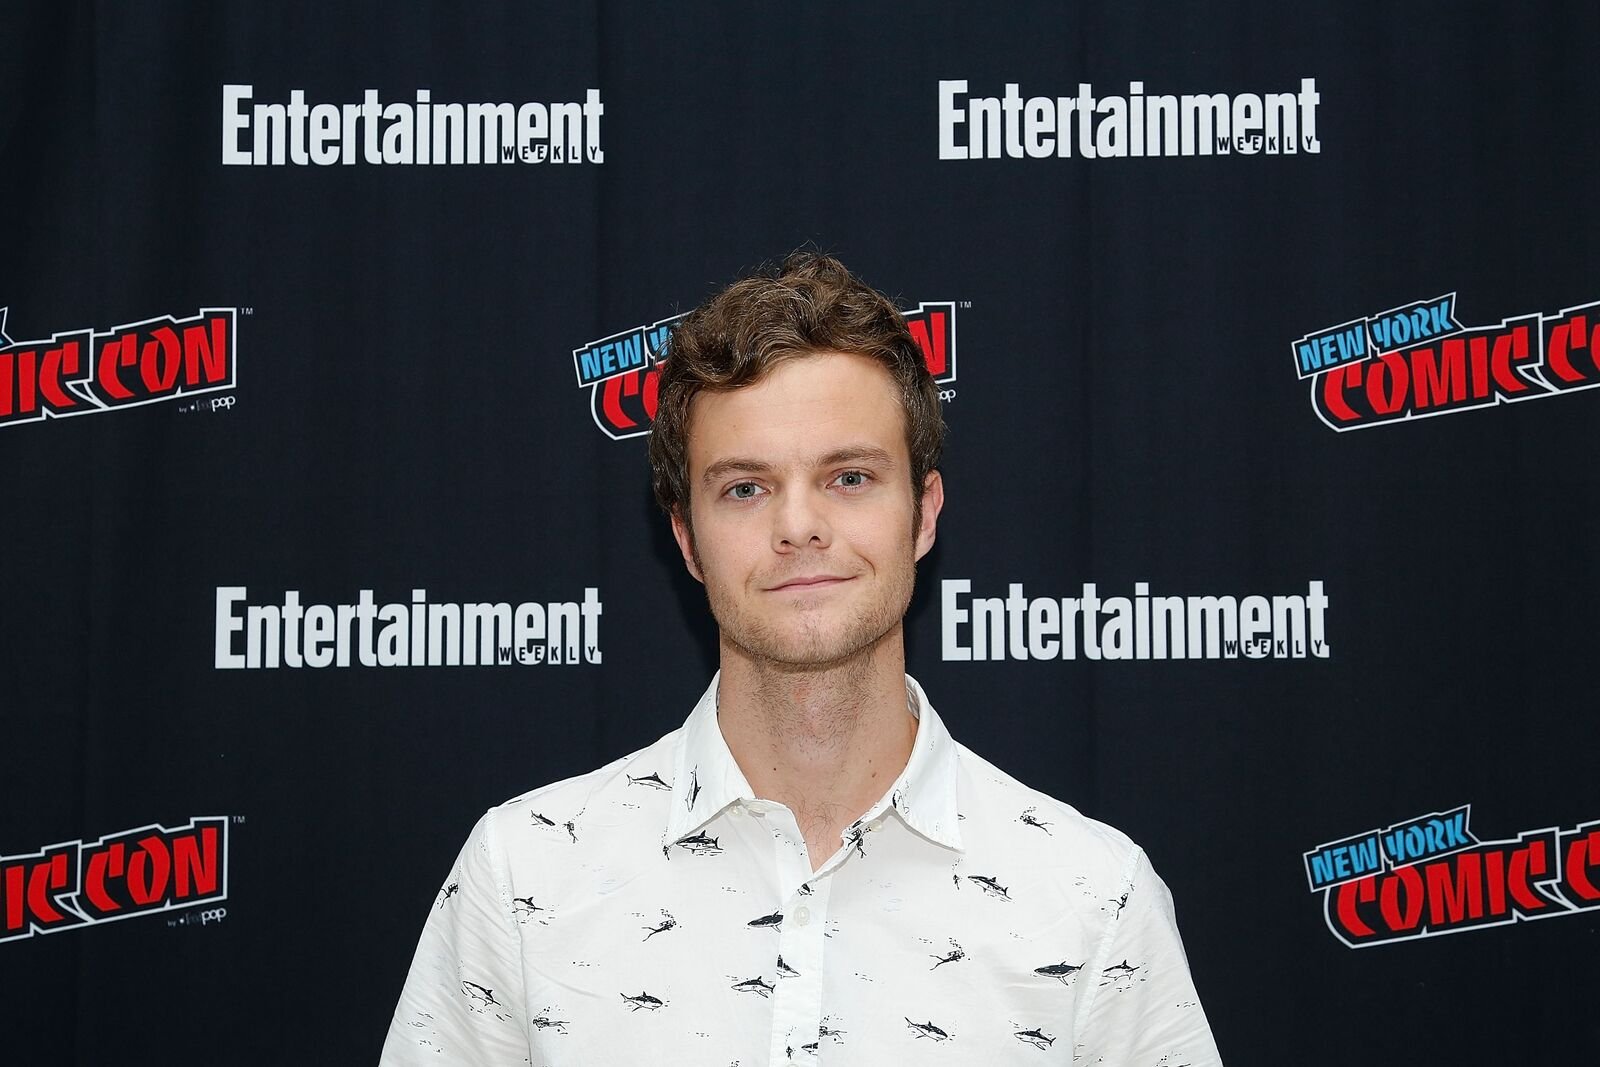 Actor Jack Quaid participates in Entertainment Weekly's Breaking Big panel at New York Comic Con on October 7, 2018 in New York City | Photo: Getty Images